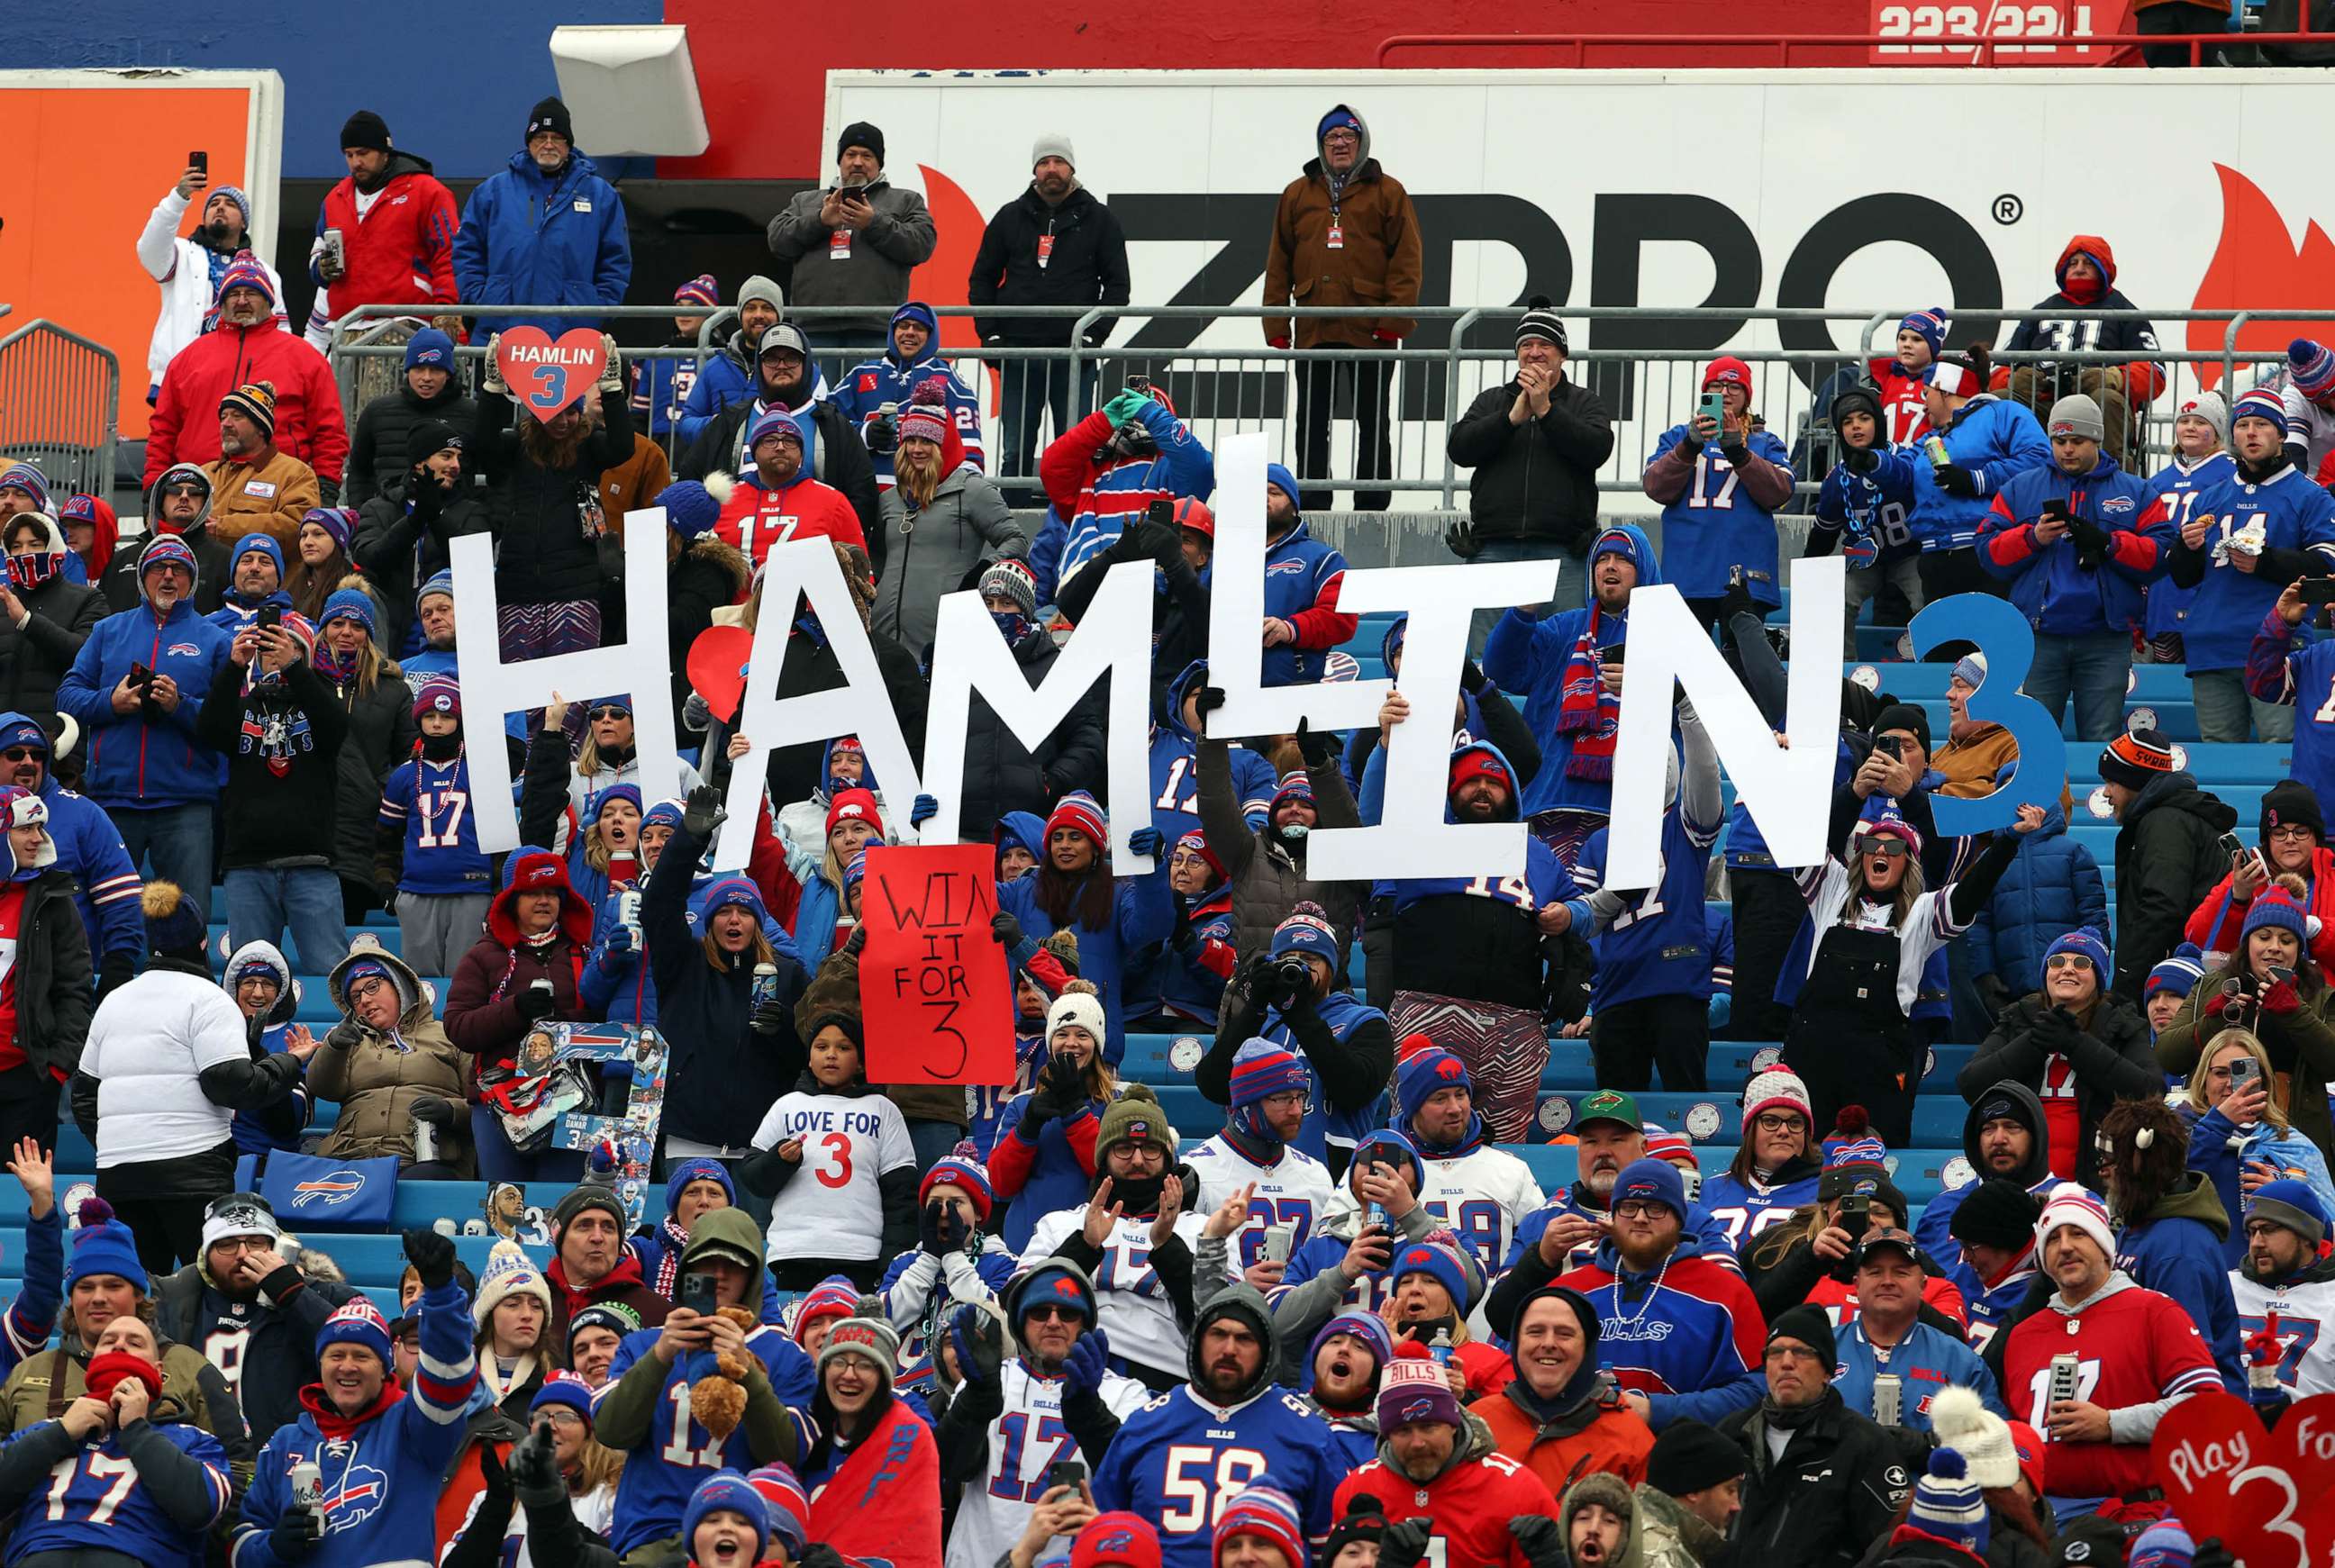 PHOTO: Buffalo Bills fans hold signs in support of Buffalo Bills safety Damar Hamlin prior to the game against the New England Patriots at Highmark Stadium, Jan. 08, 2023 in Orchard Park, New York.